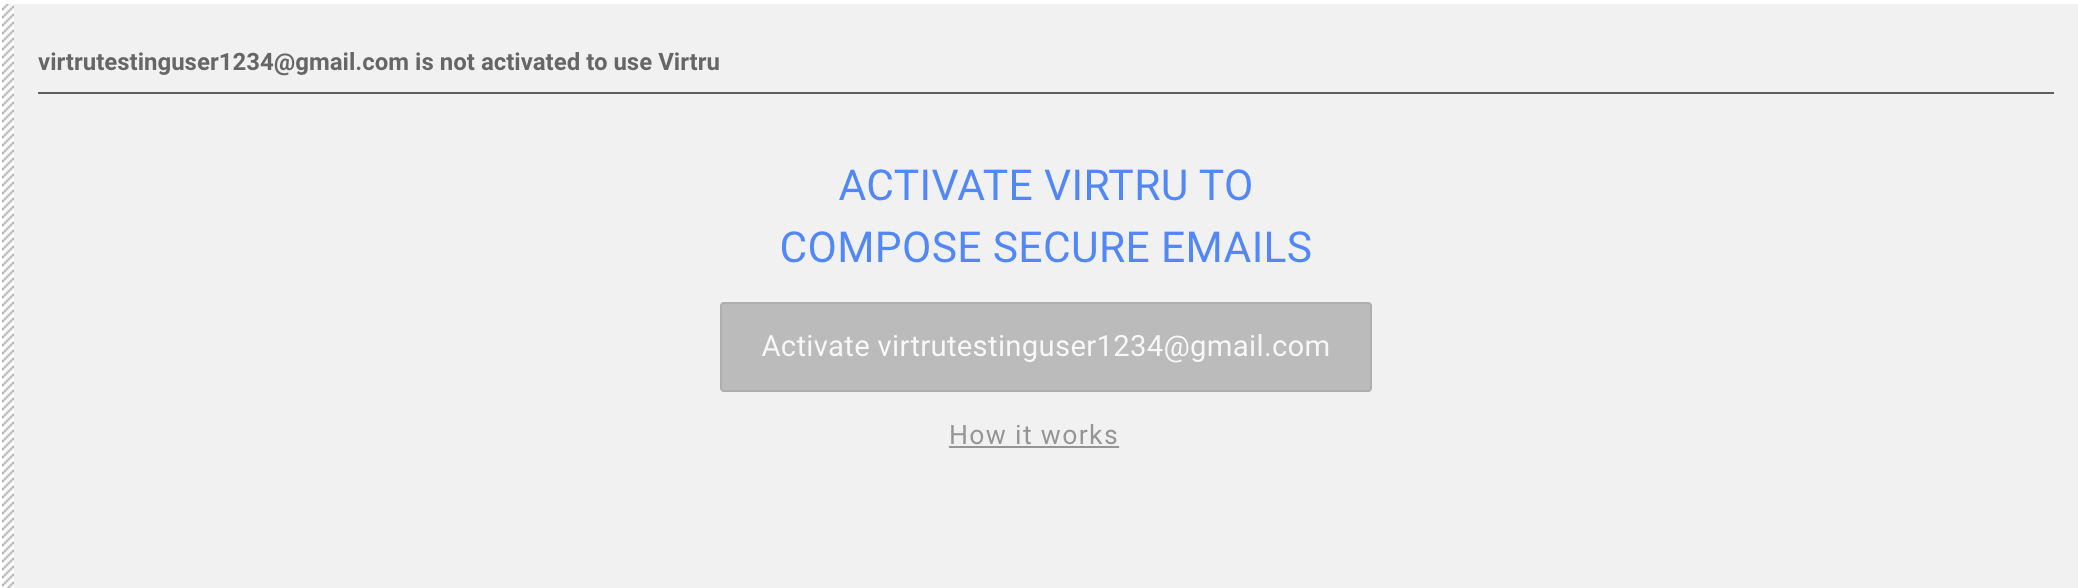 Inactive activation button in a decryption window